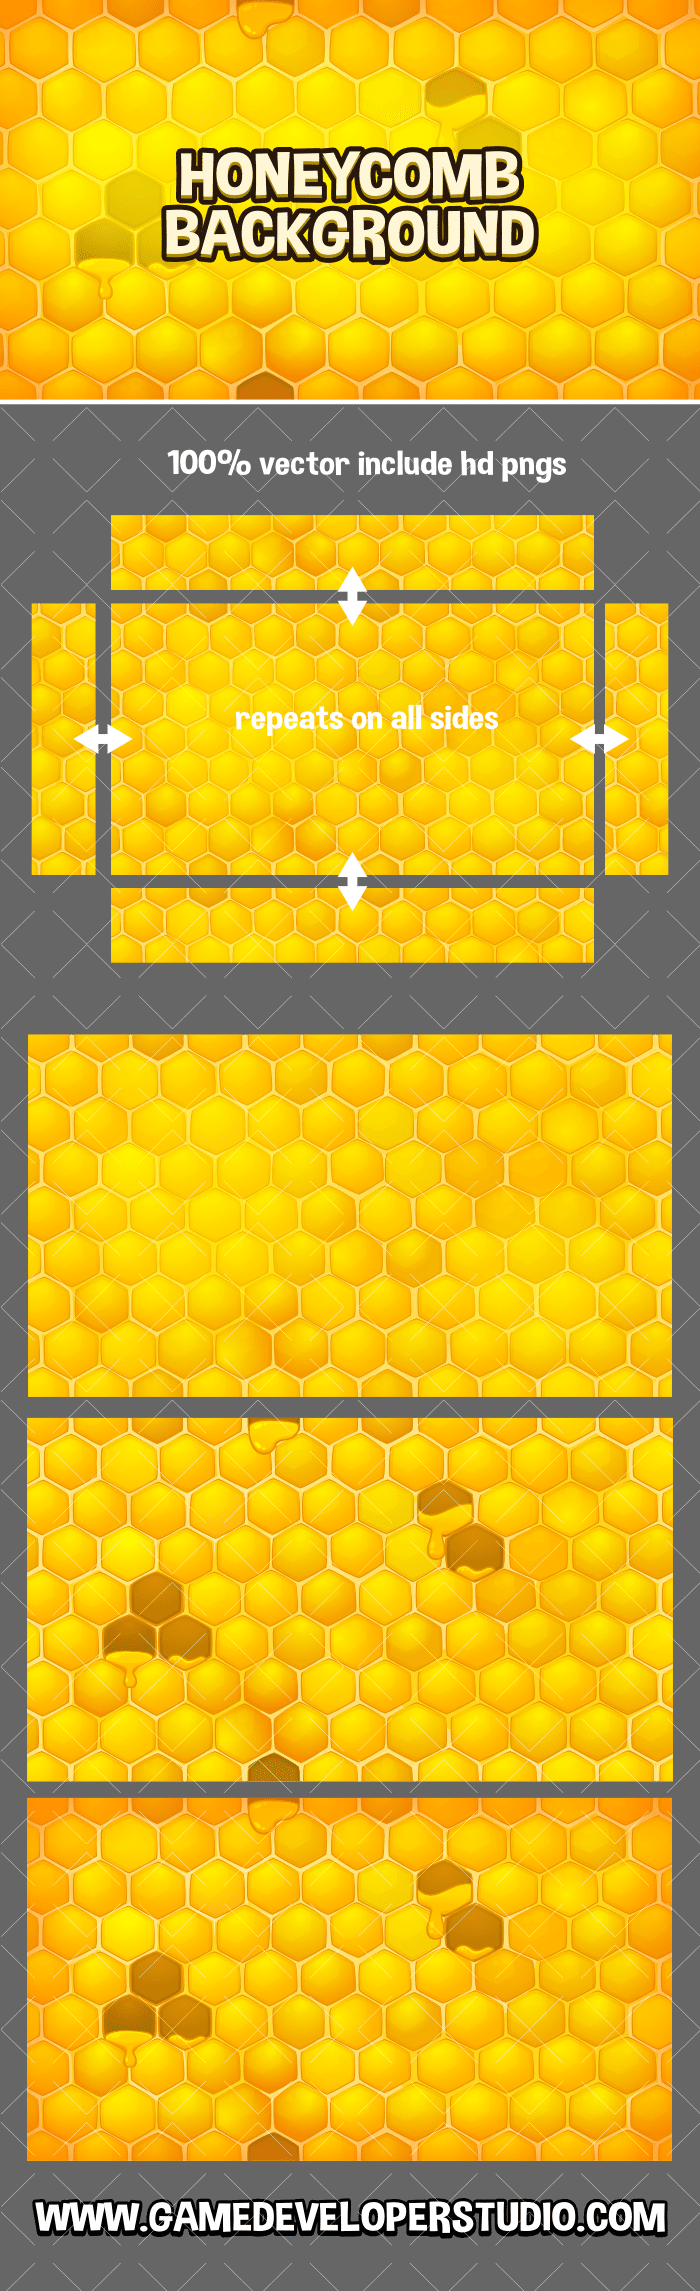 Honeycomb repeating background